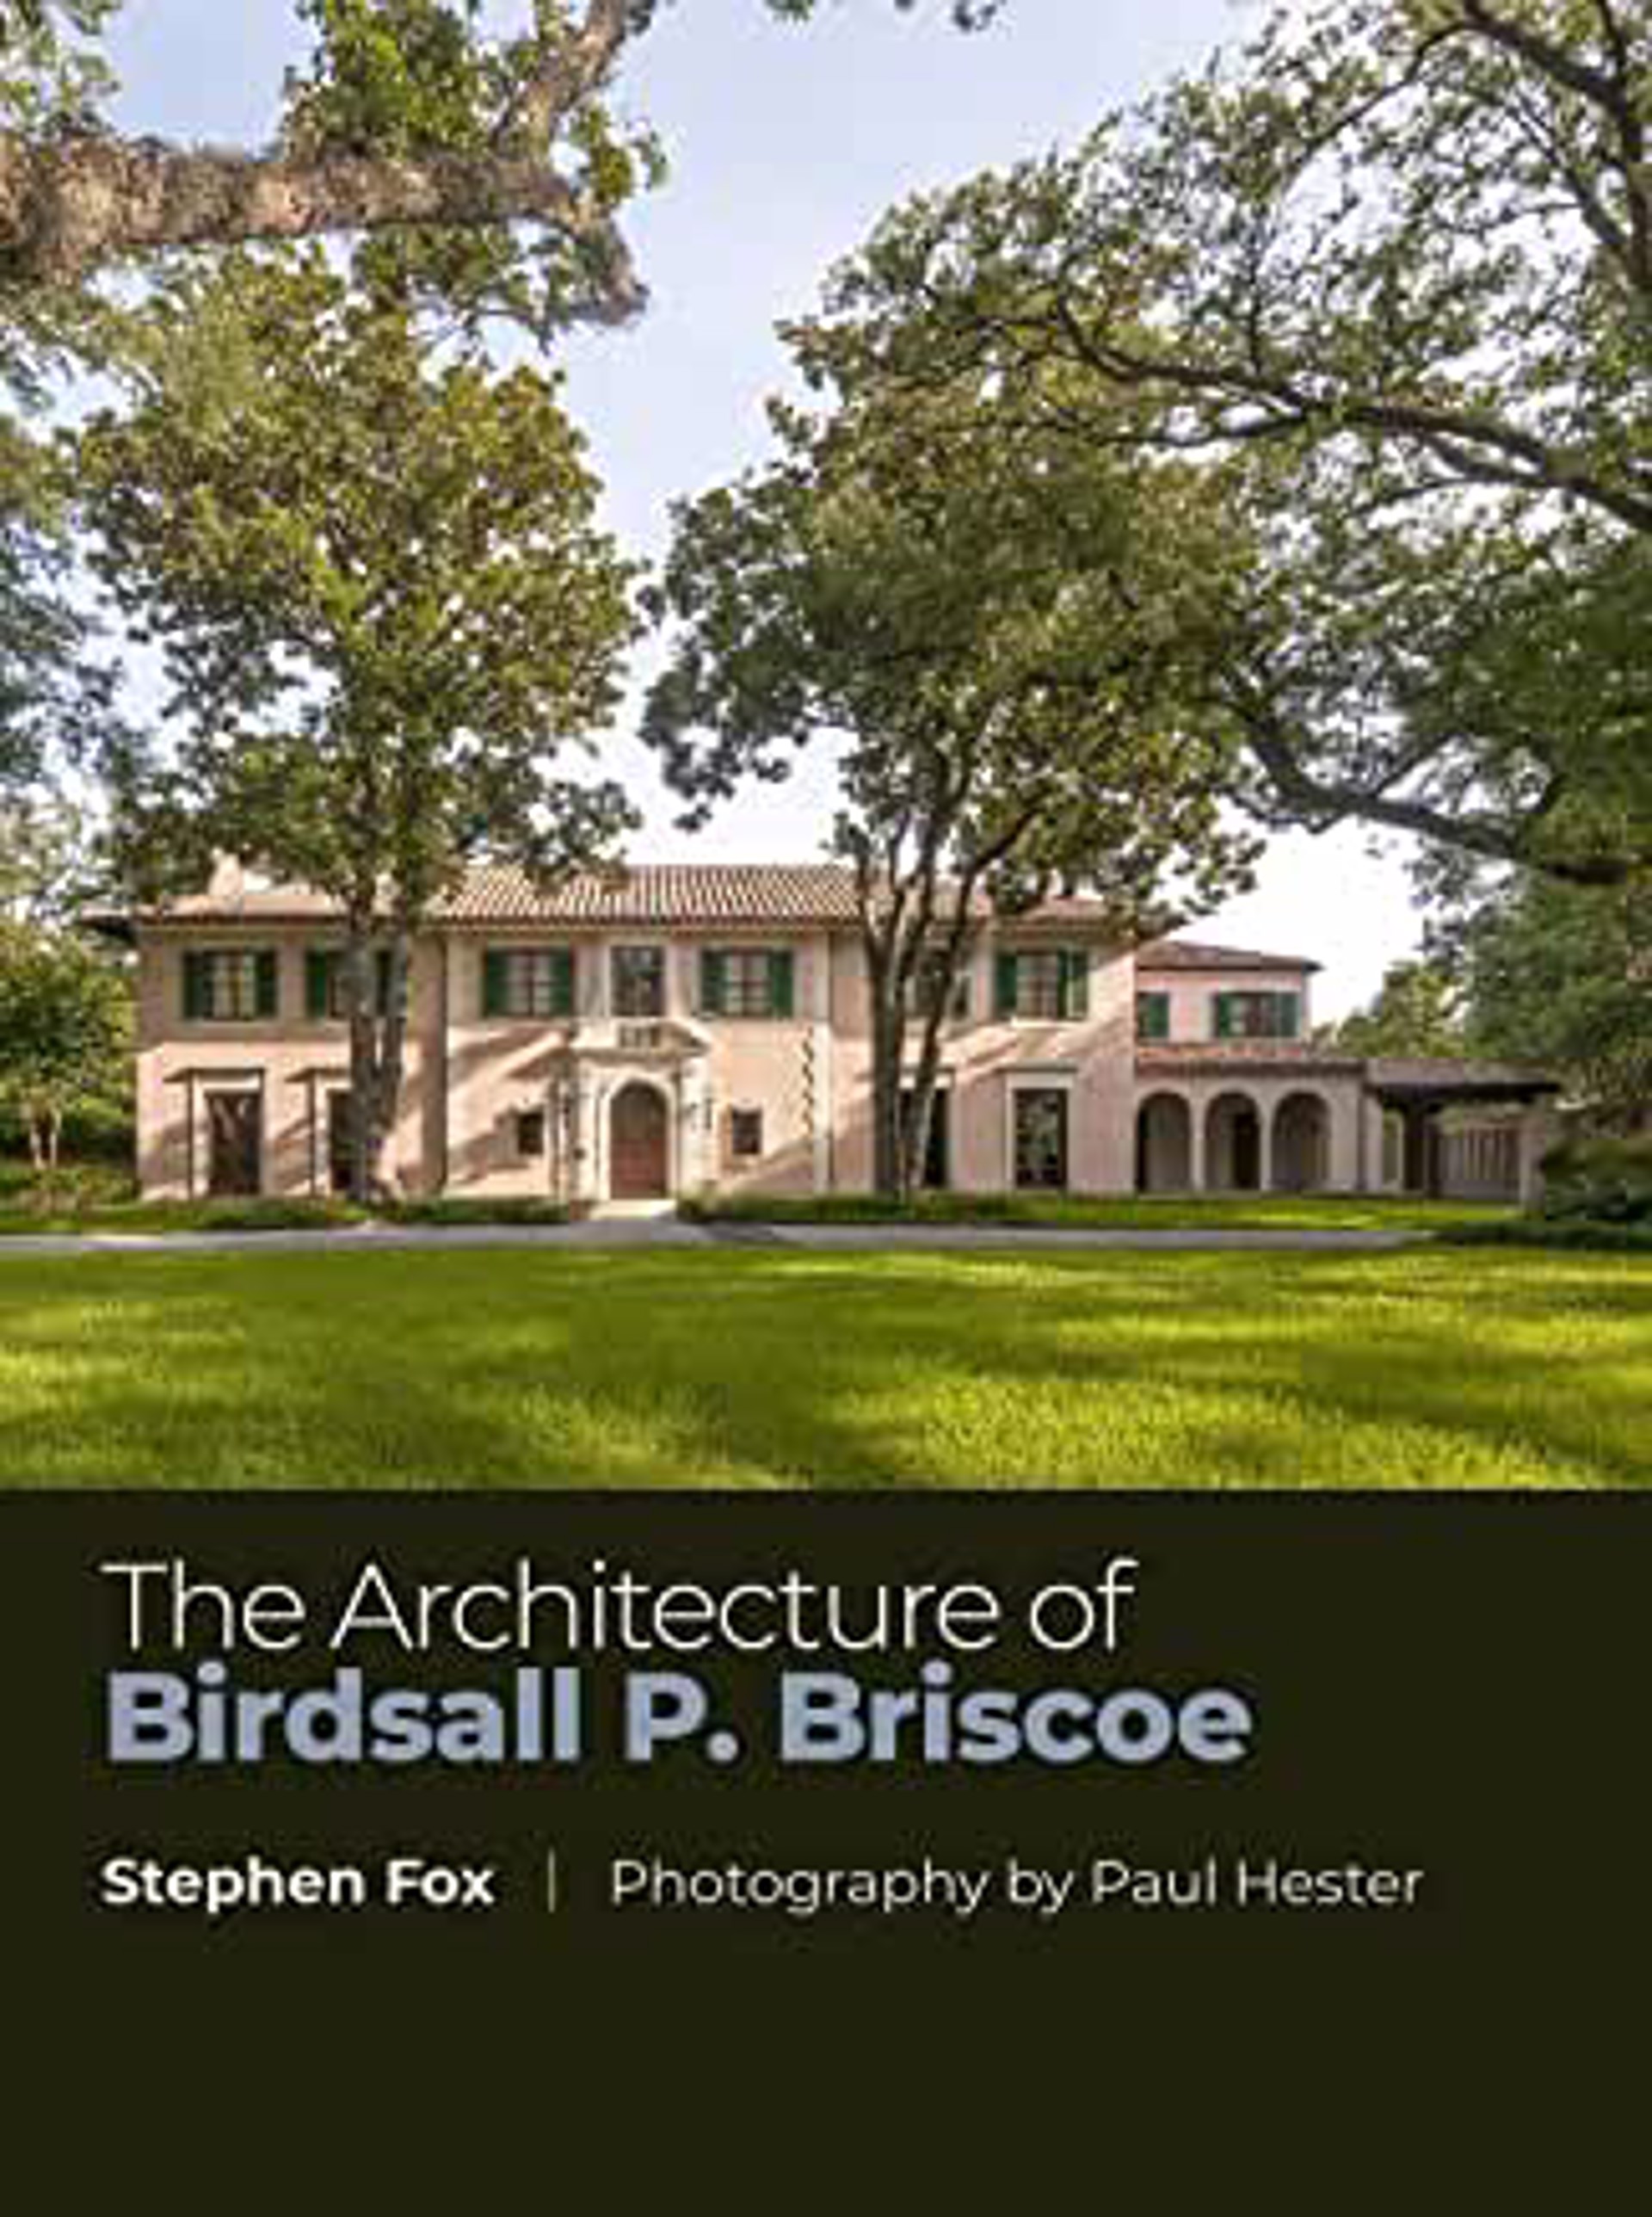 The Architecture of Birdsall P. Briscoe by Stephen Fox by Publications